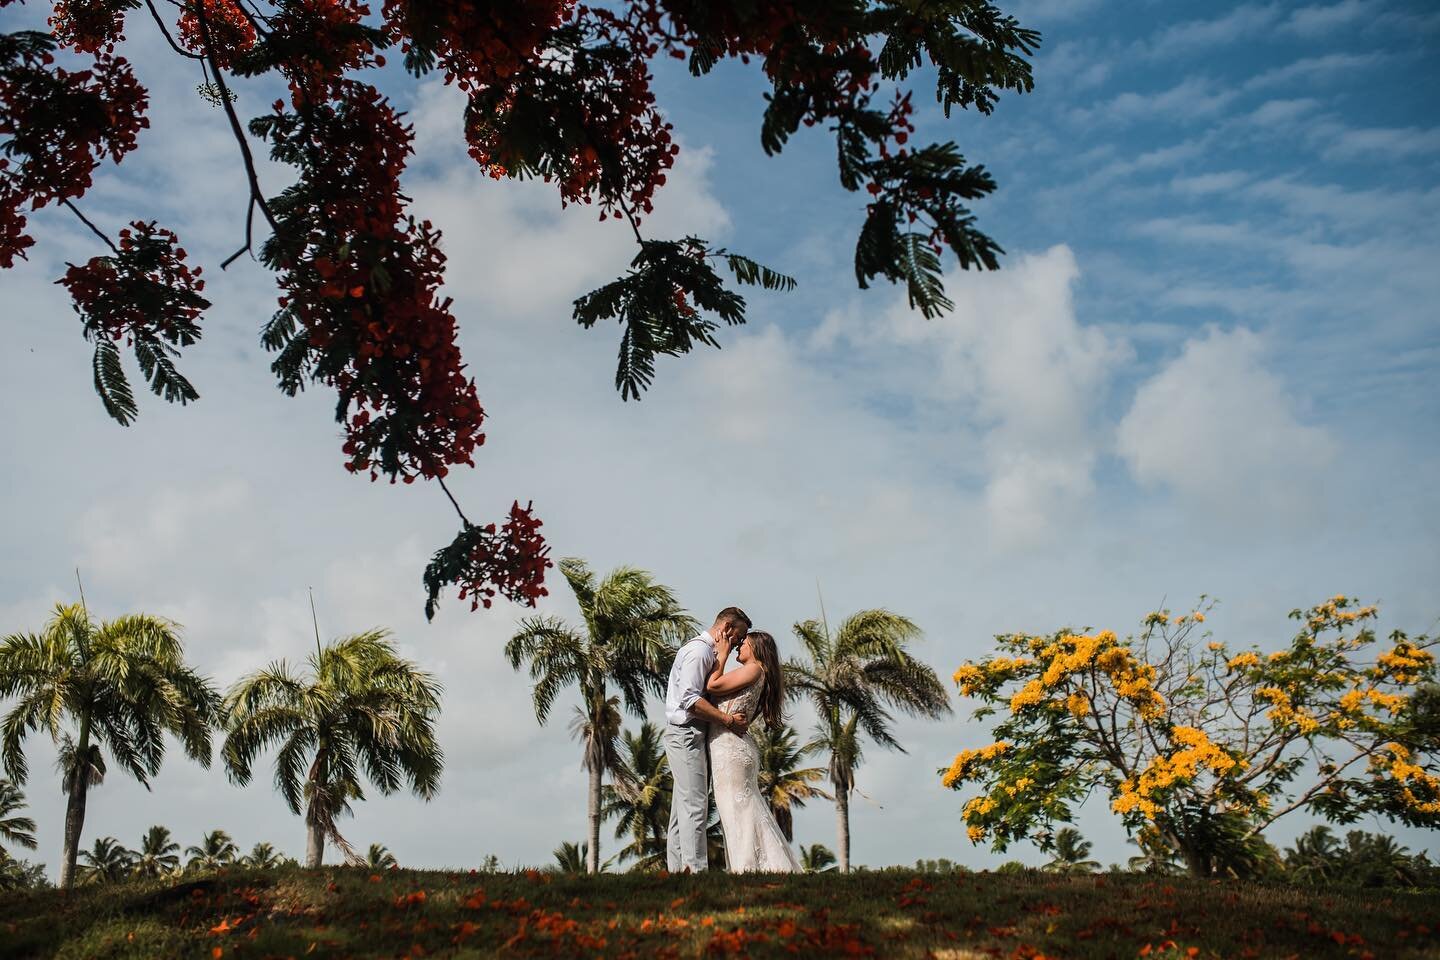 So&hellip; the Dominican Republic 🇩🇴 is a pretty rad place to get married. 😯😯😯
-
Who wants to get married in the Caribbean raise their hand and then take me with you pleeeeeaze?